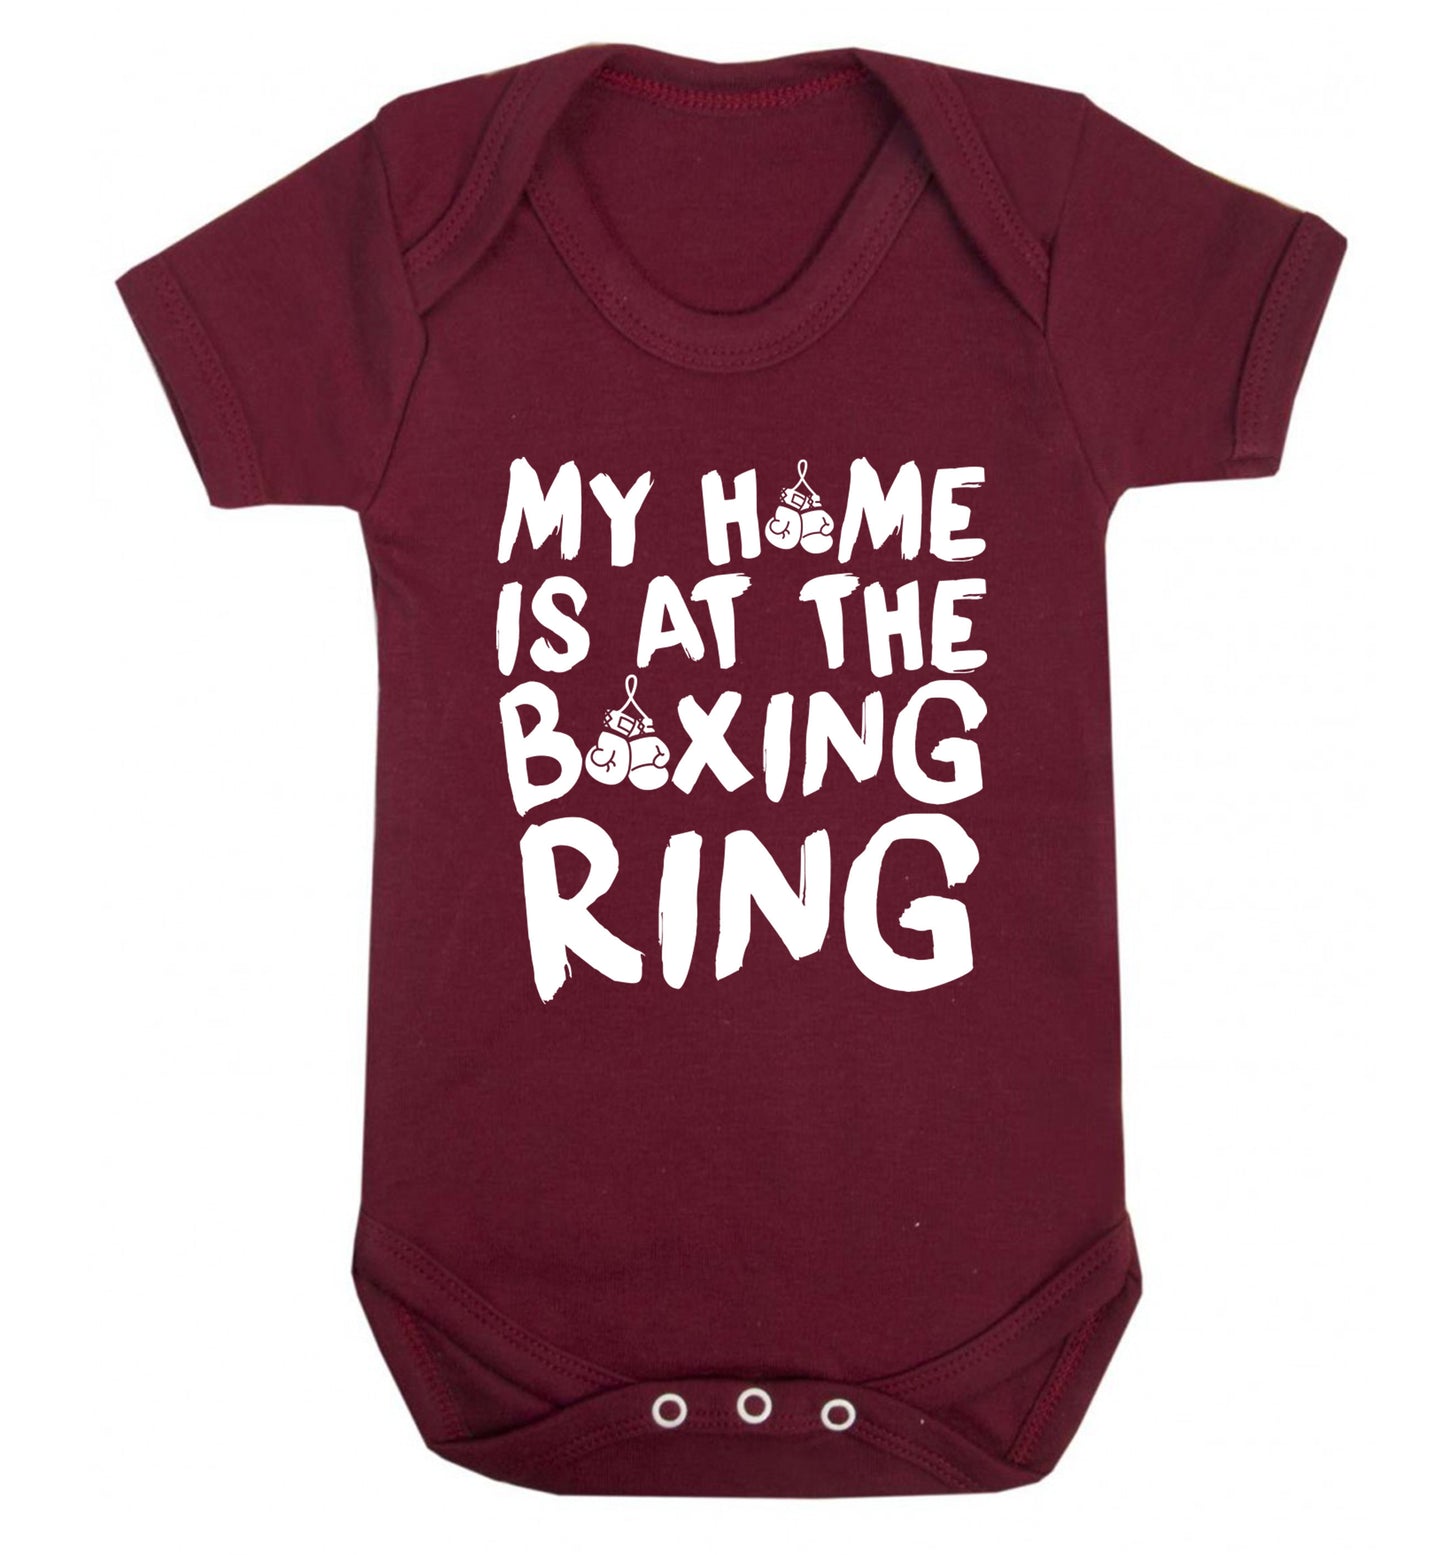 My home is at the boxing ring Baby Vest maroon 18-24 months